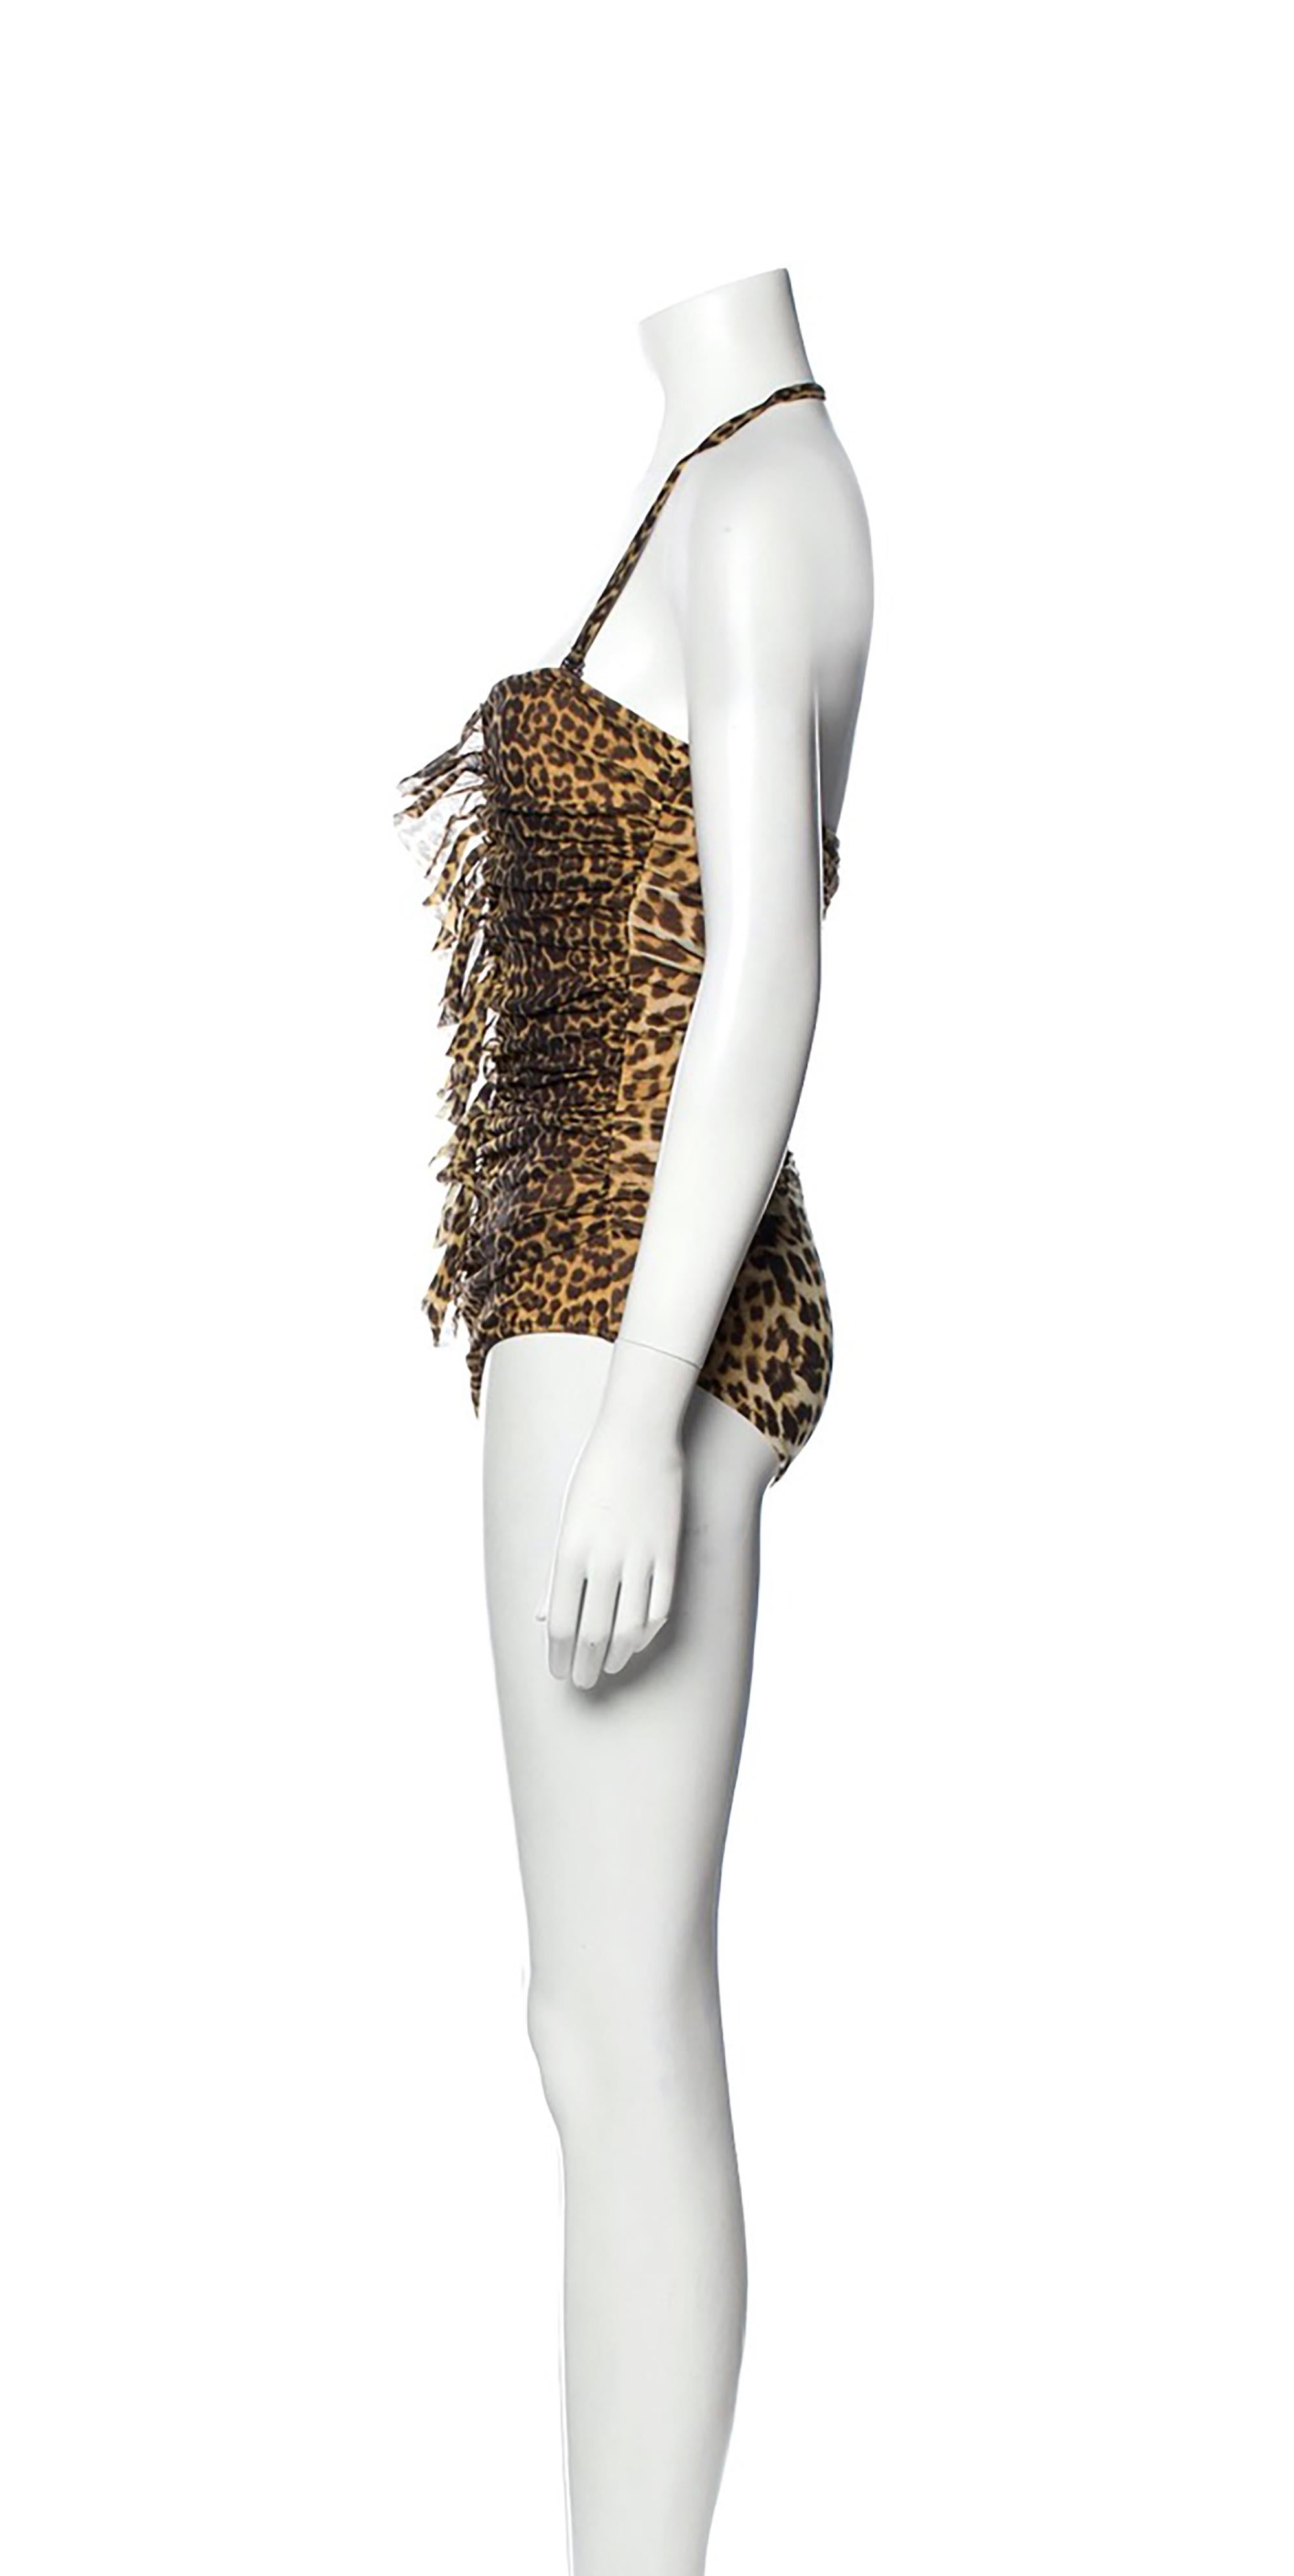 1990s Jean Paul Gaultier Animal Print Bathing Suit
Halter
Leopard Print
Ruffle
Condition: Excellent, looks new
100% polyamide
Size S / US 4 / IT40